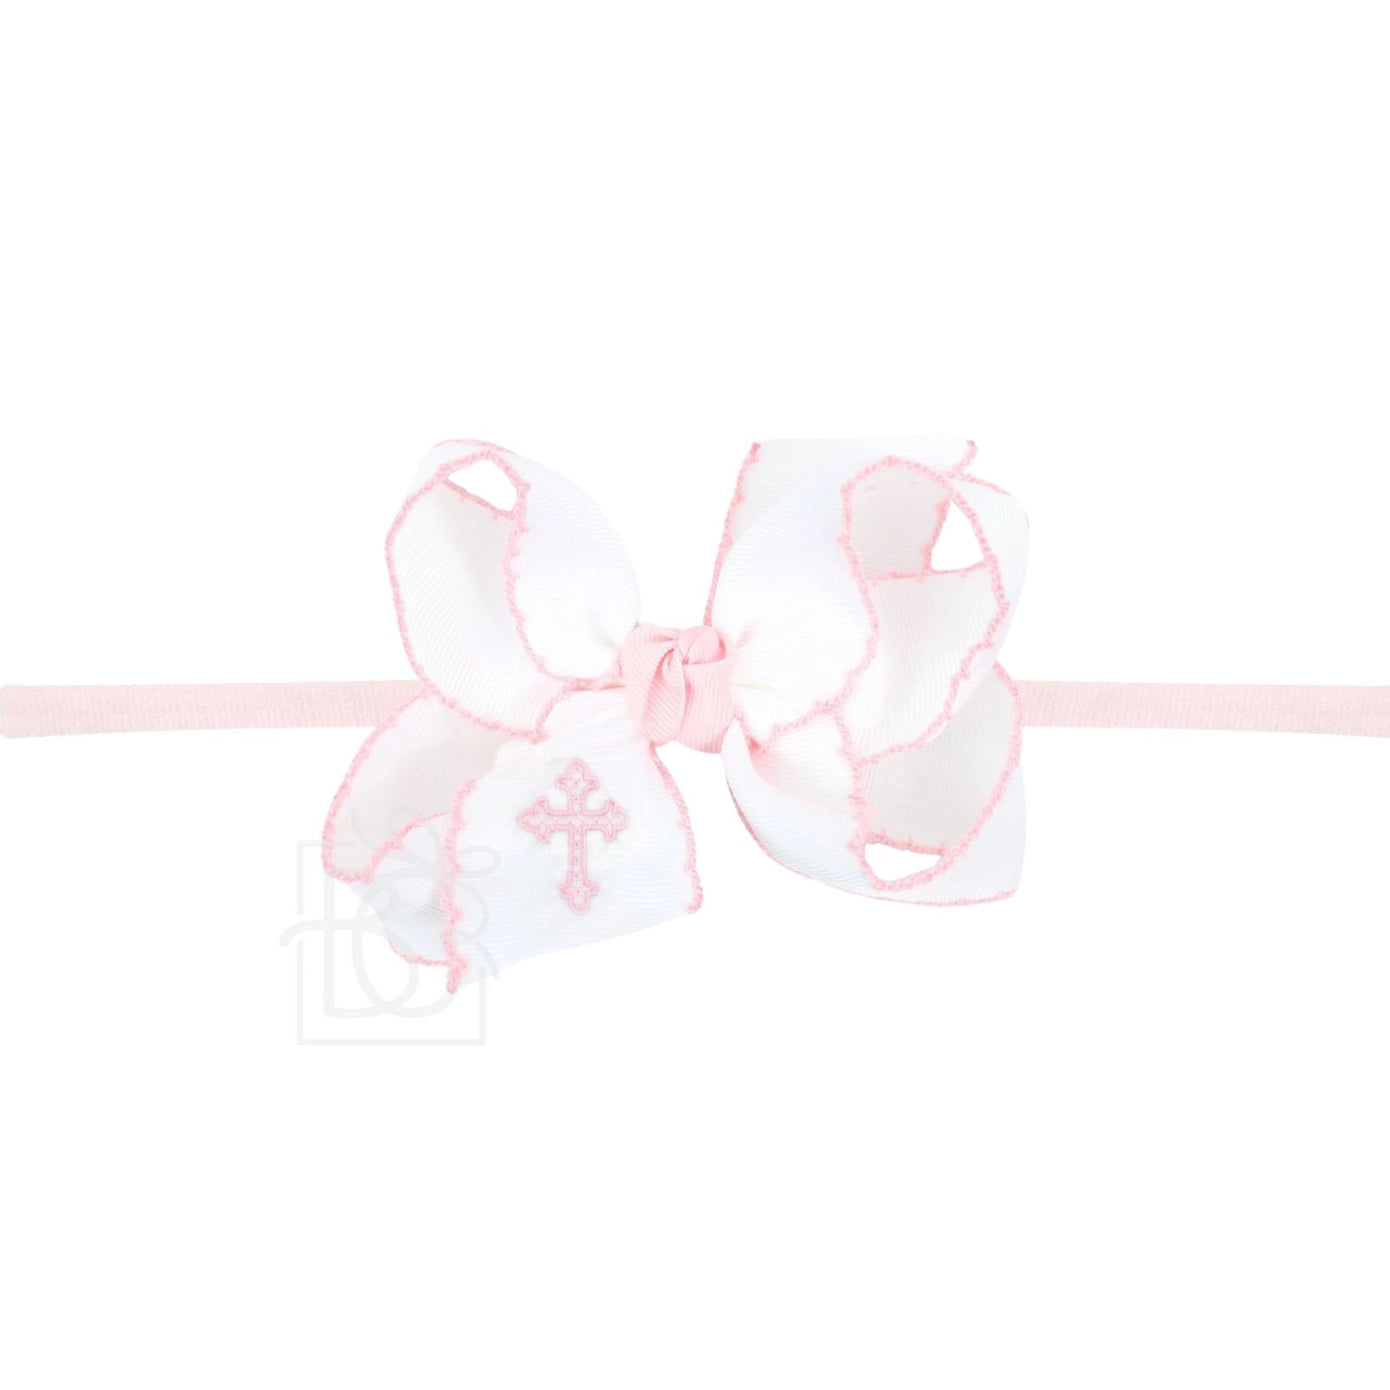 Beyond Creations Embroidery Easter Cross Crochet Edge Bows